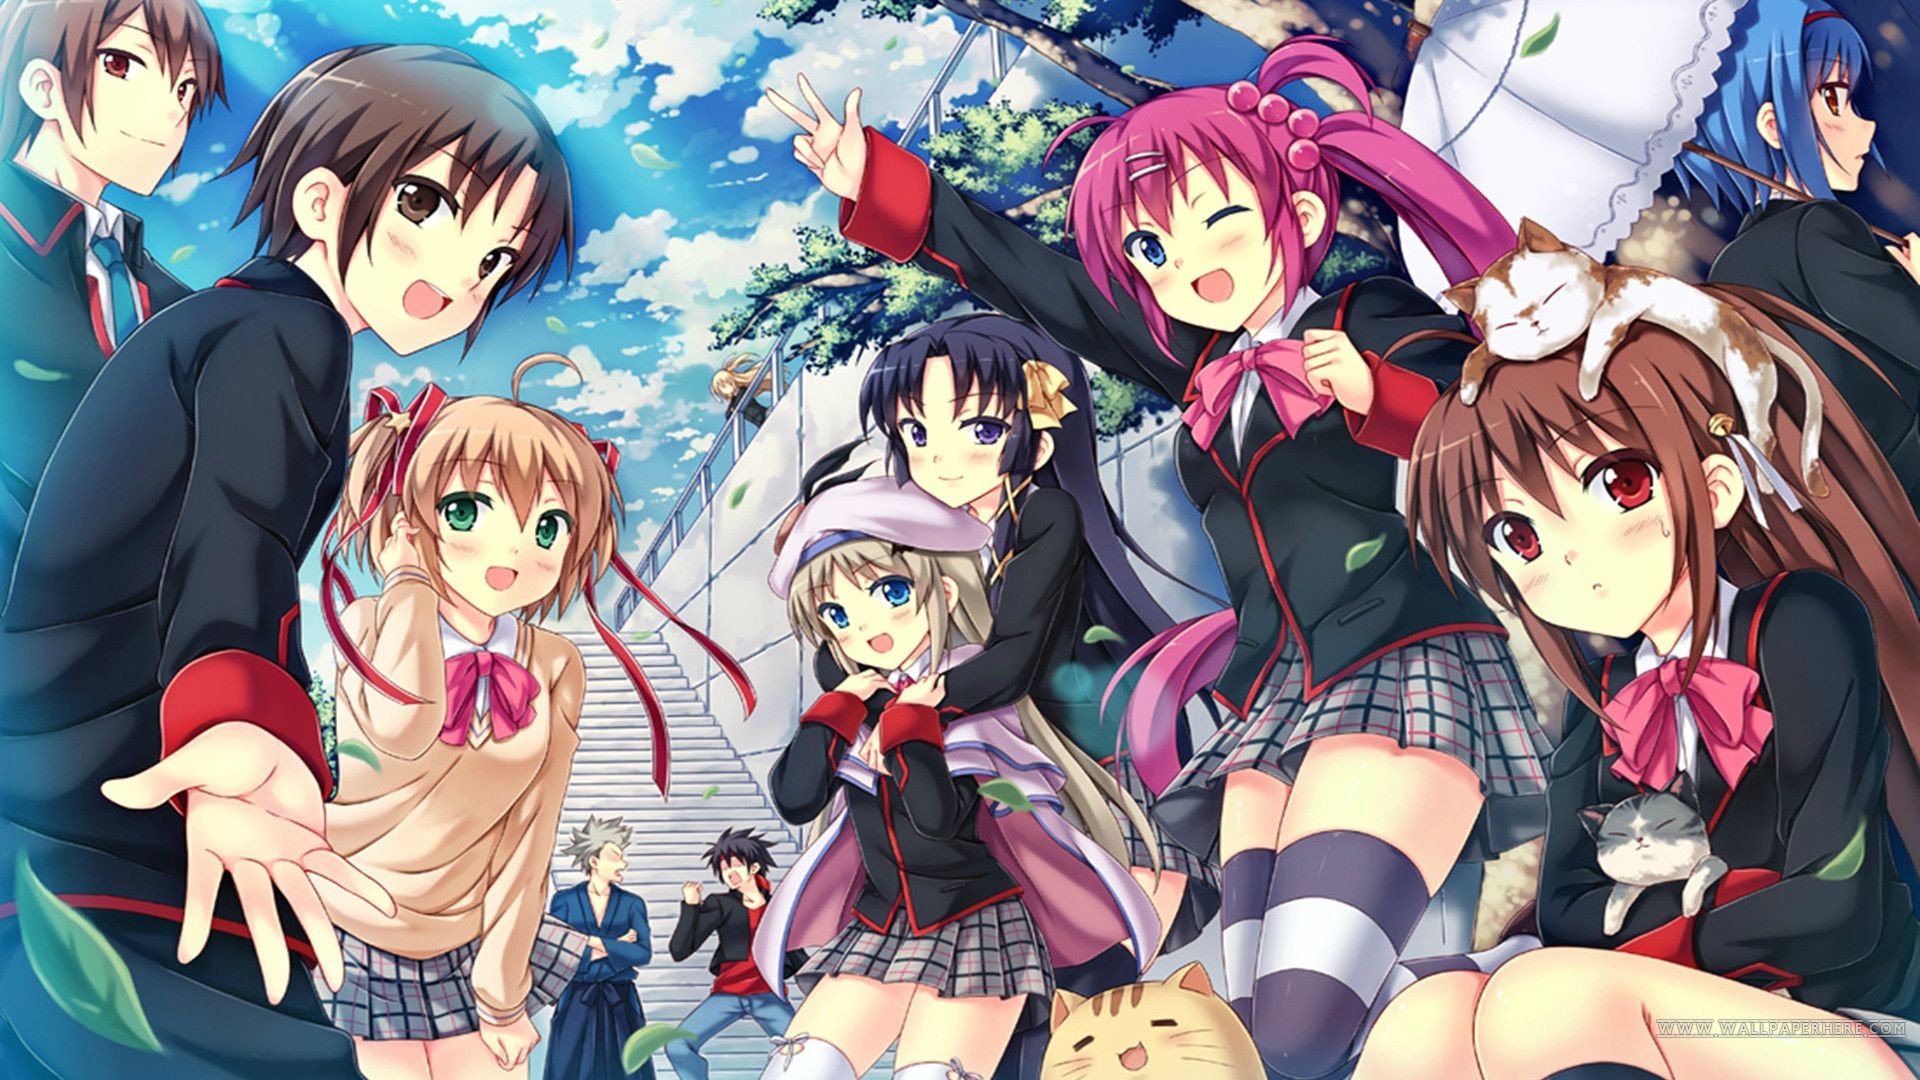 Anime 1920x1080 anime anime girls Little Busters! group of women anime boys hand gesture open mouth blue eyes pink hair striped stockings stockings green eyes purple eyes red eyes women with umbrella umbrella miniskirt